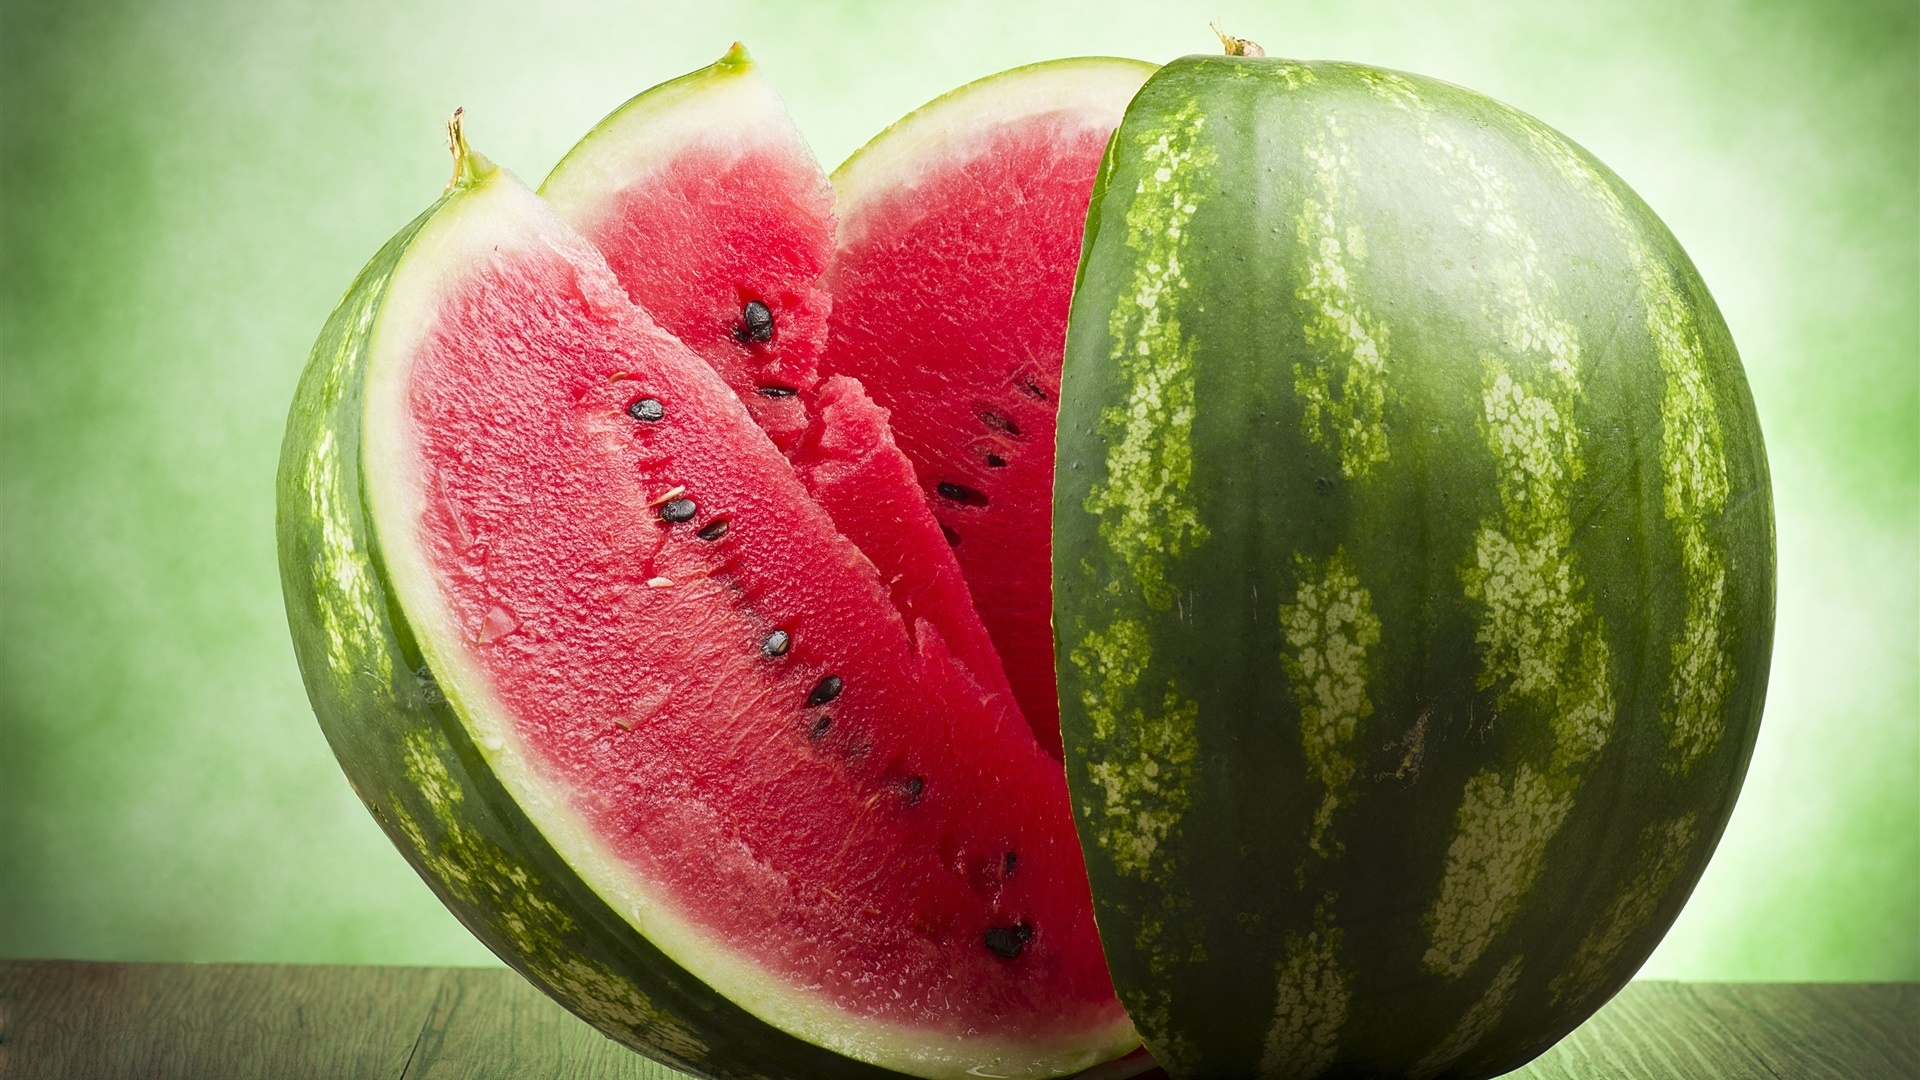 Watermelon: A large, round, or oval-shaped fruit with dark green skin, sweet pink flesh, and a lot of black seeds. 1920x1080 Full HD Background.